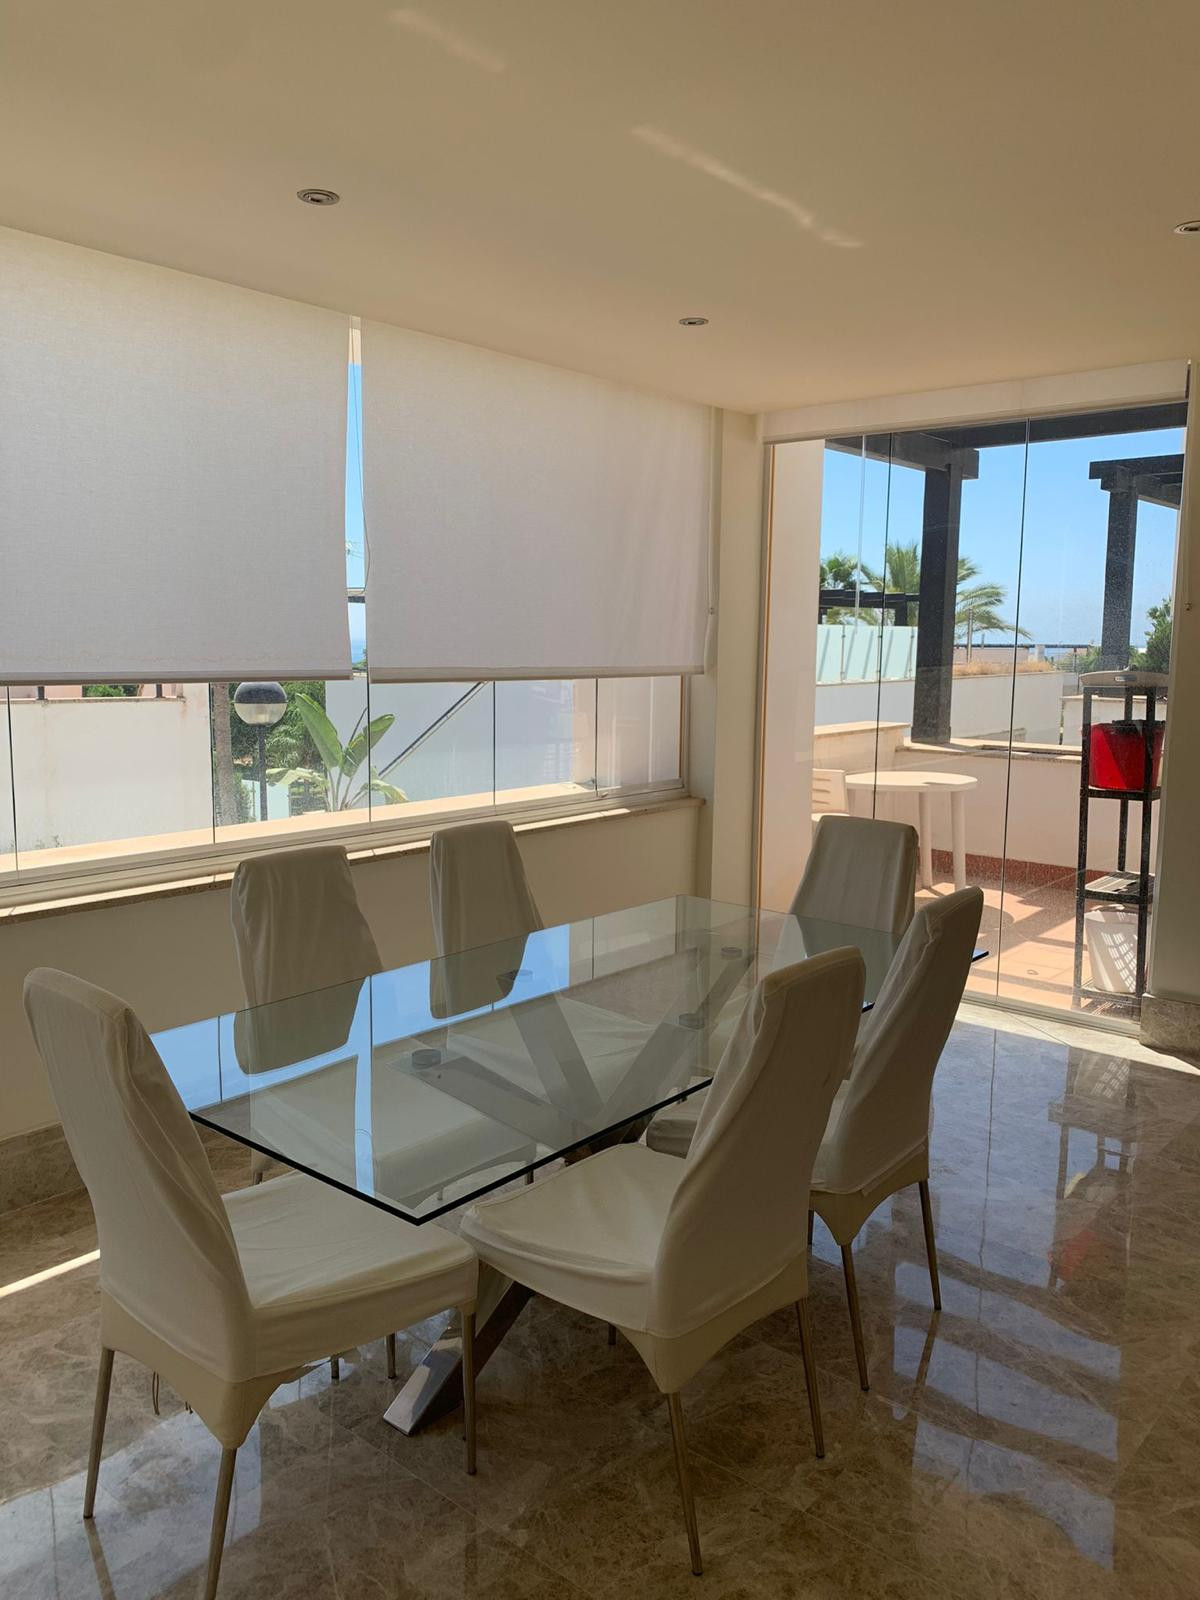 3 bedroom Penthouse For Sale in Costa del Sol, Málaga - thumb 9